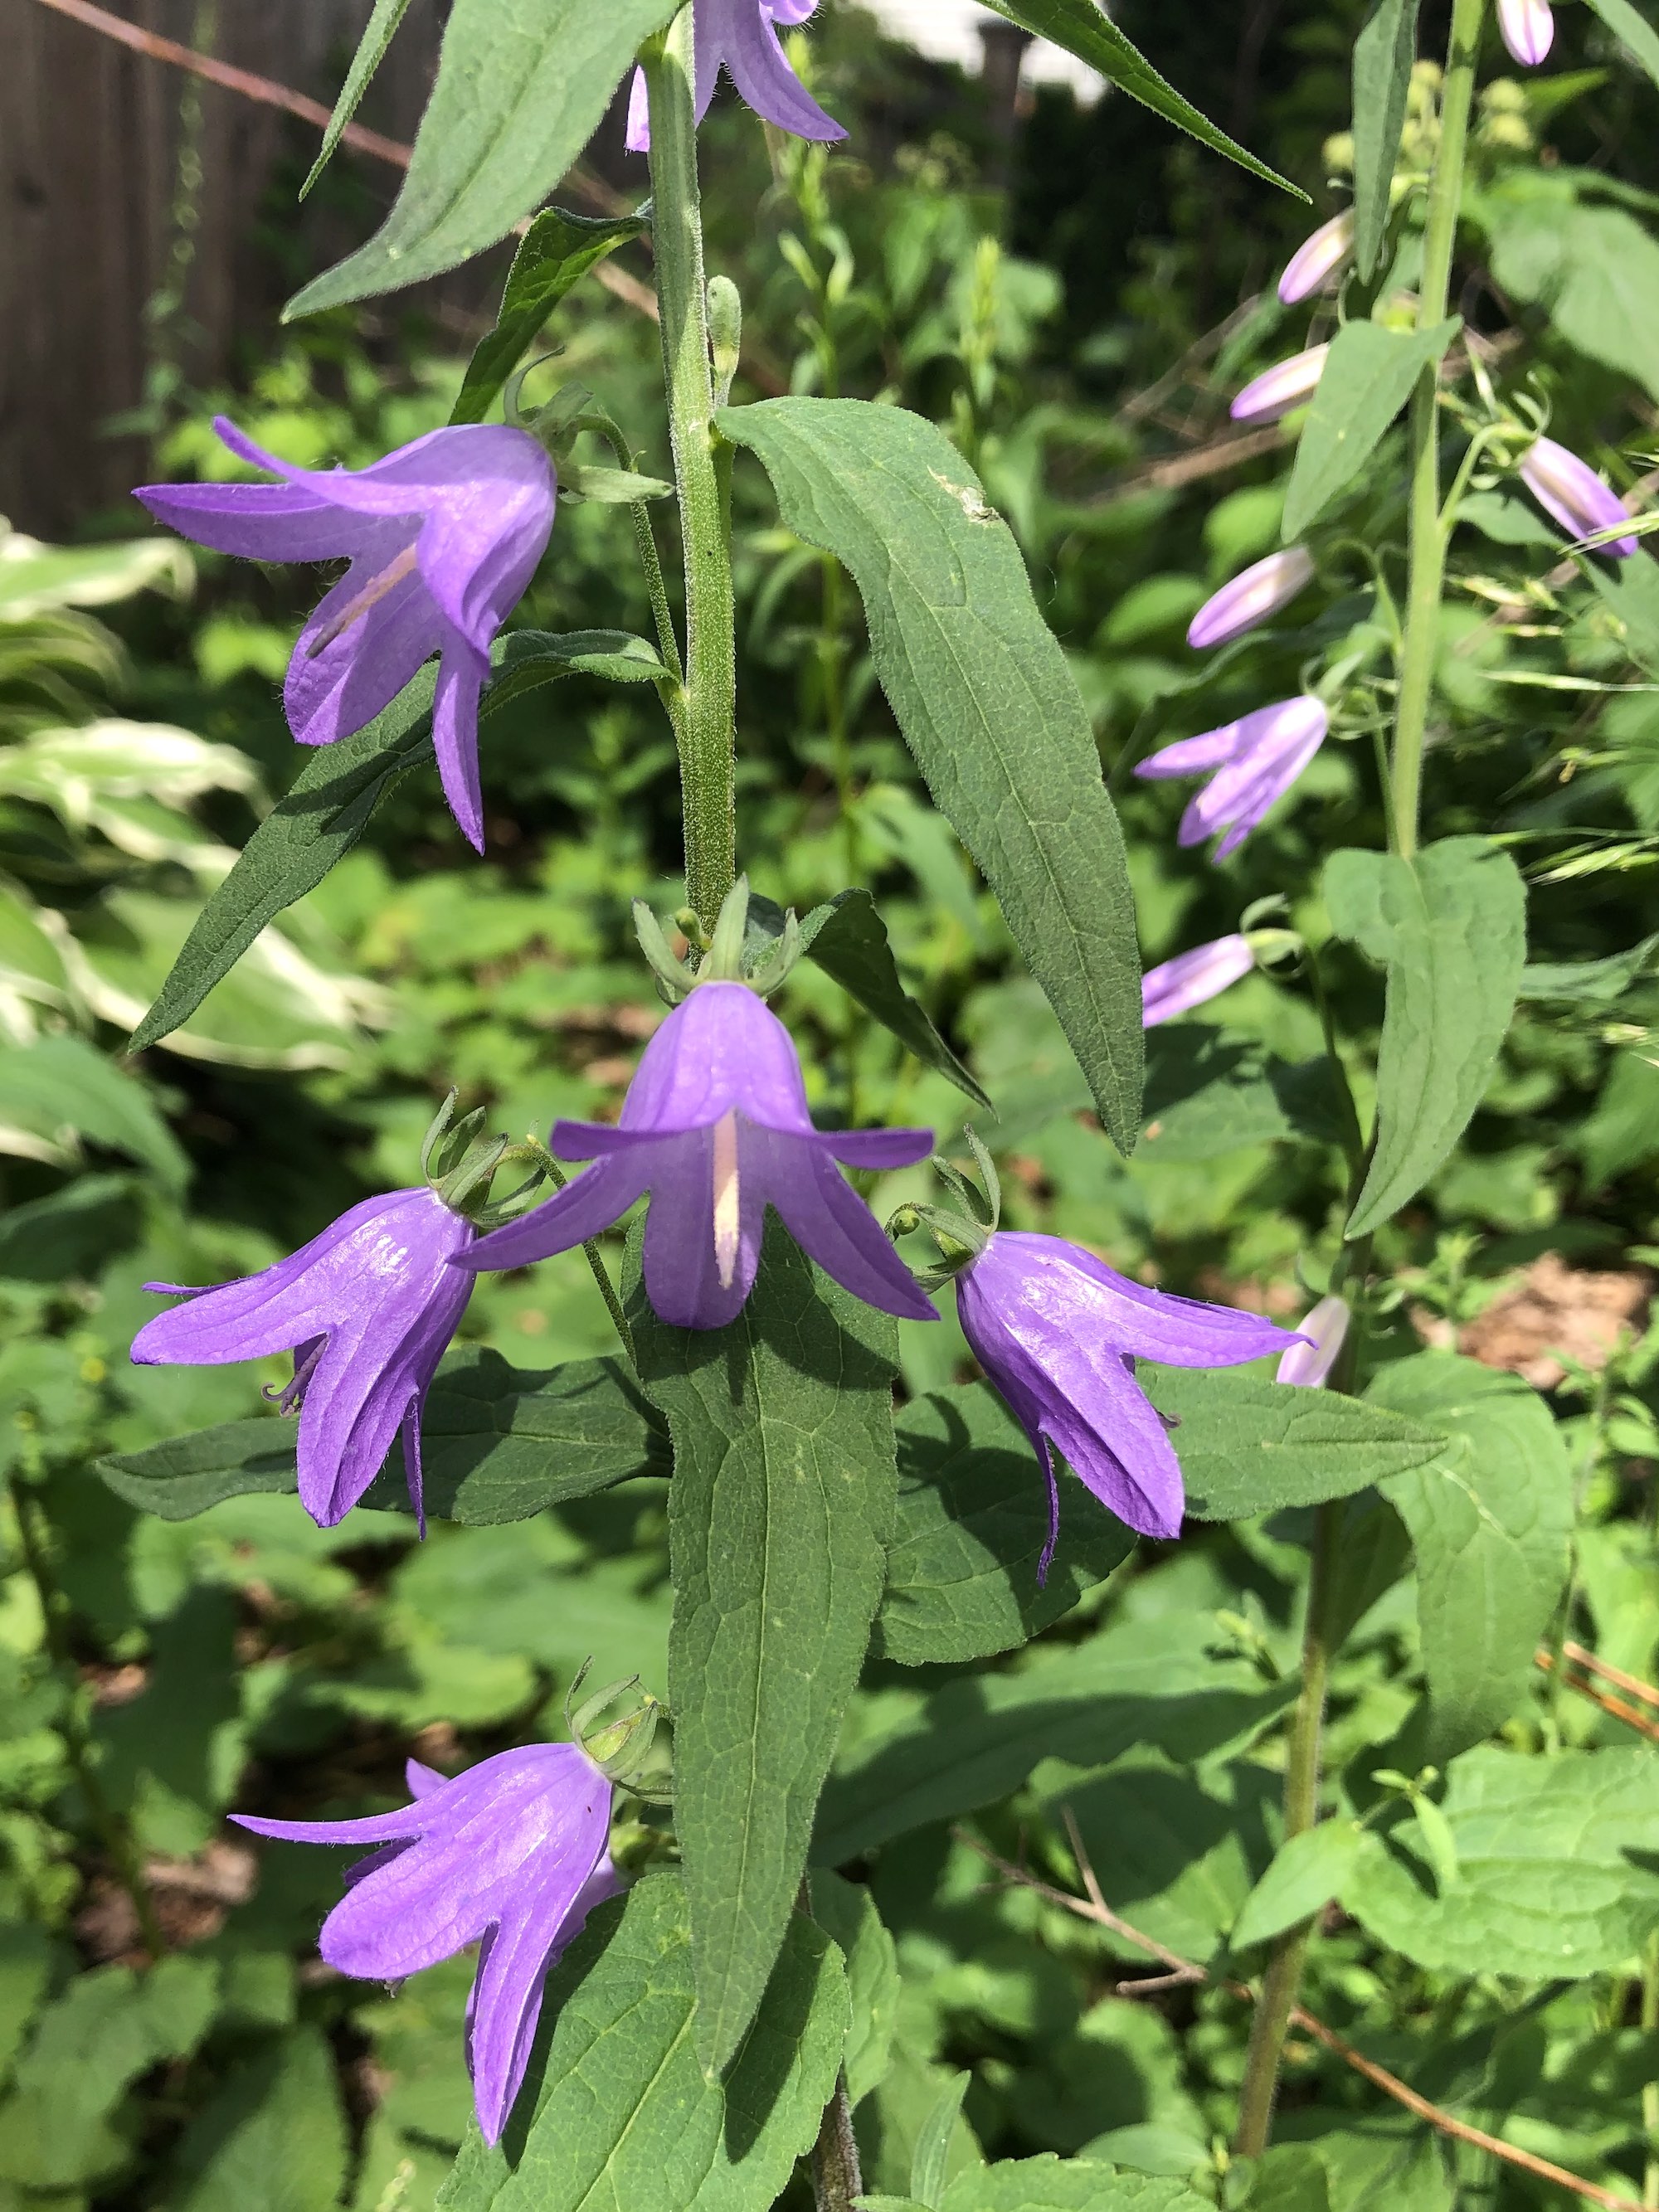 Creeping Bellflower by home in Madison, Wisconsin on June 26, 2019.